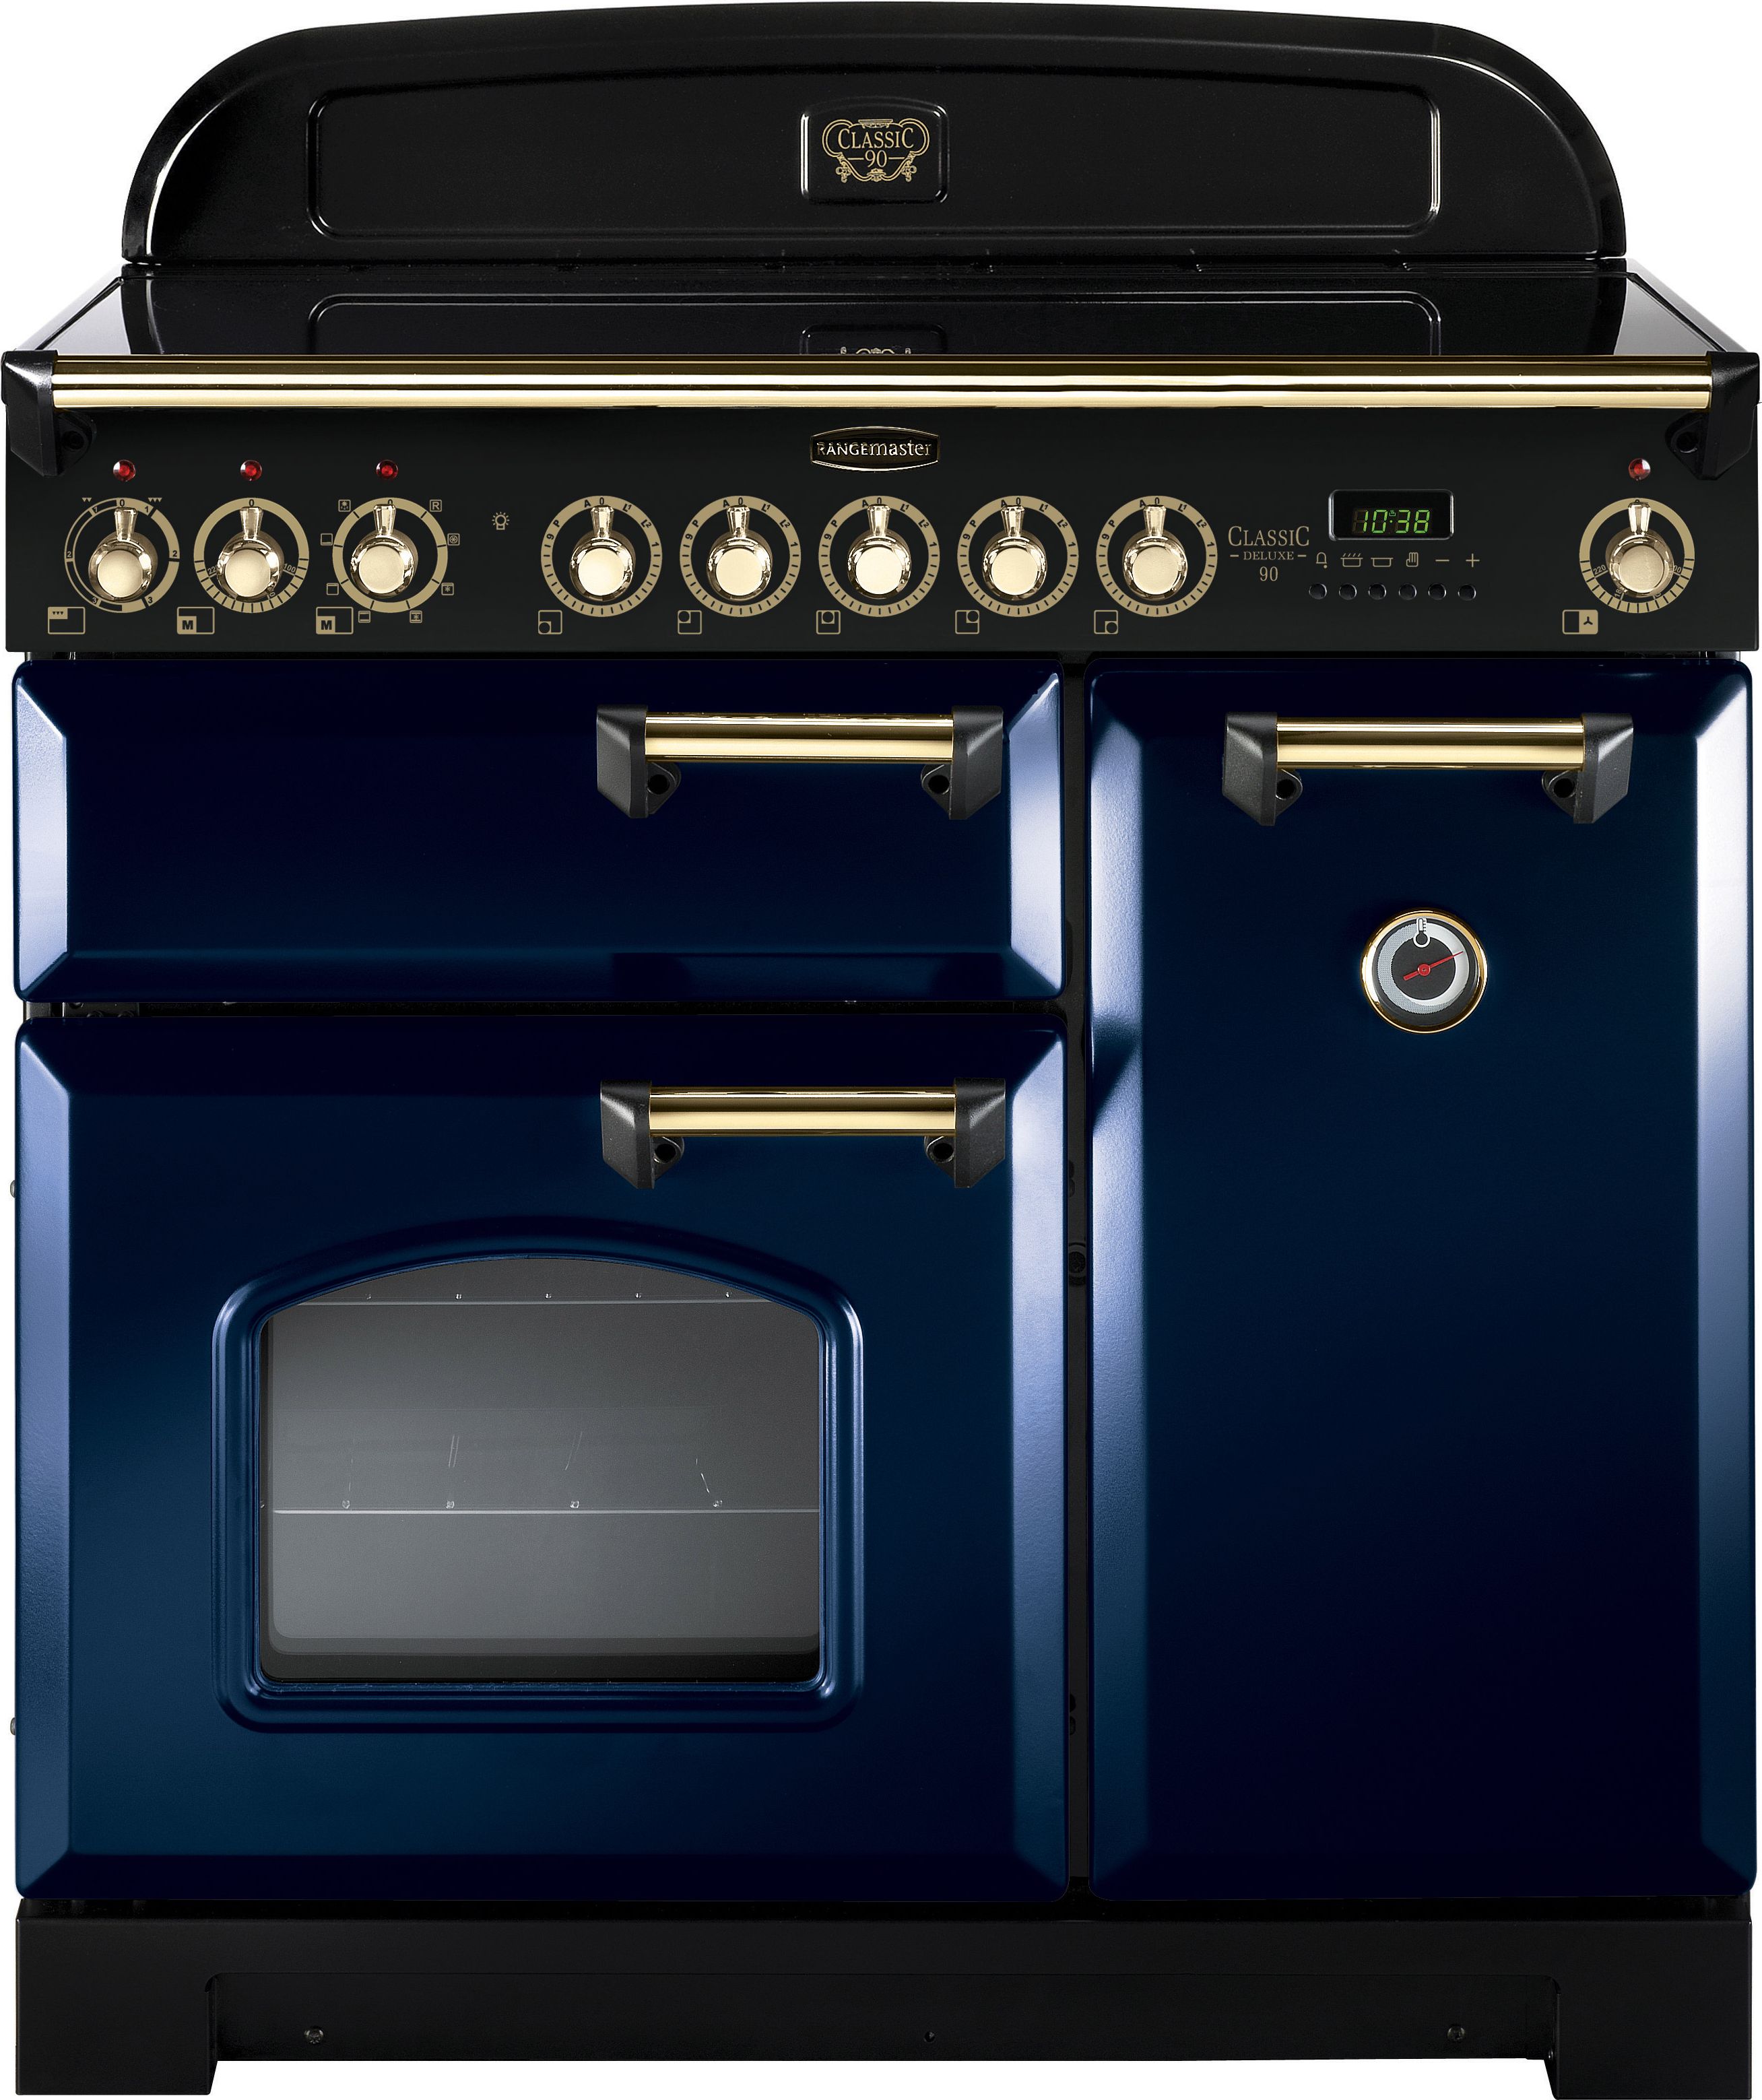 Rangemaster Classic Deluxe CDL90EIRB/B 90cm Electric Range Cooker with Induction Hob - Regal Blue / Brass - A/A Rated, Blue